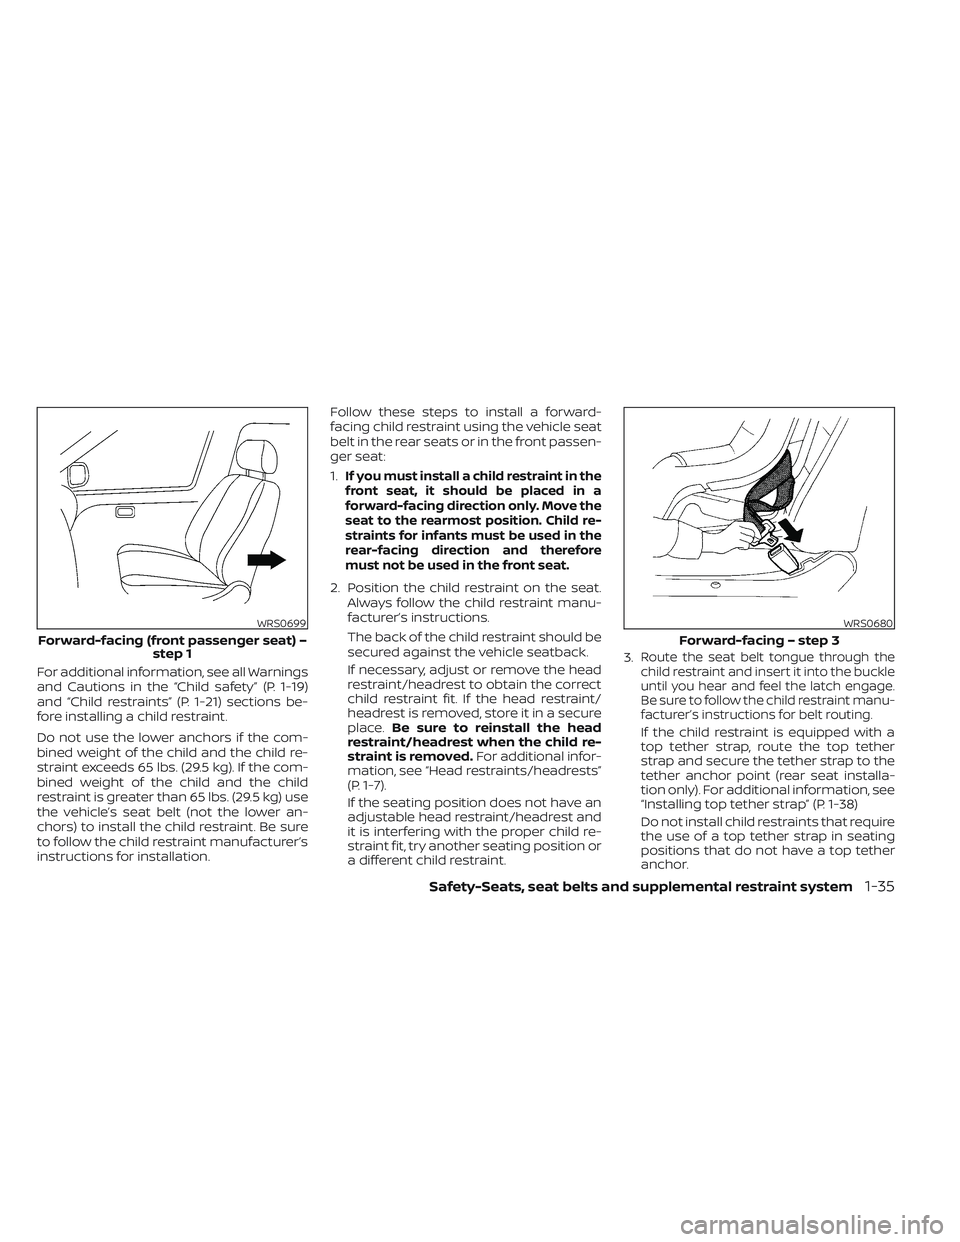 NISSAN MAXIMA 2023 Workshop Manual For additional information, see all Warnings
and Cautions in the “Child safety” (P. 1-19)
and “Child restraints” (P. 1-21) sections be-
fore installing a child restraint.
Do not use the lower 